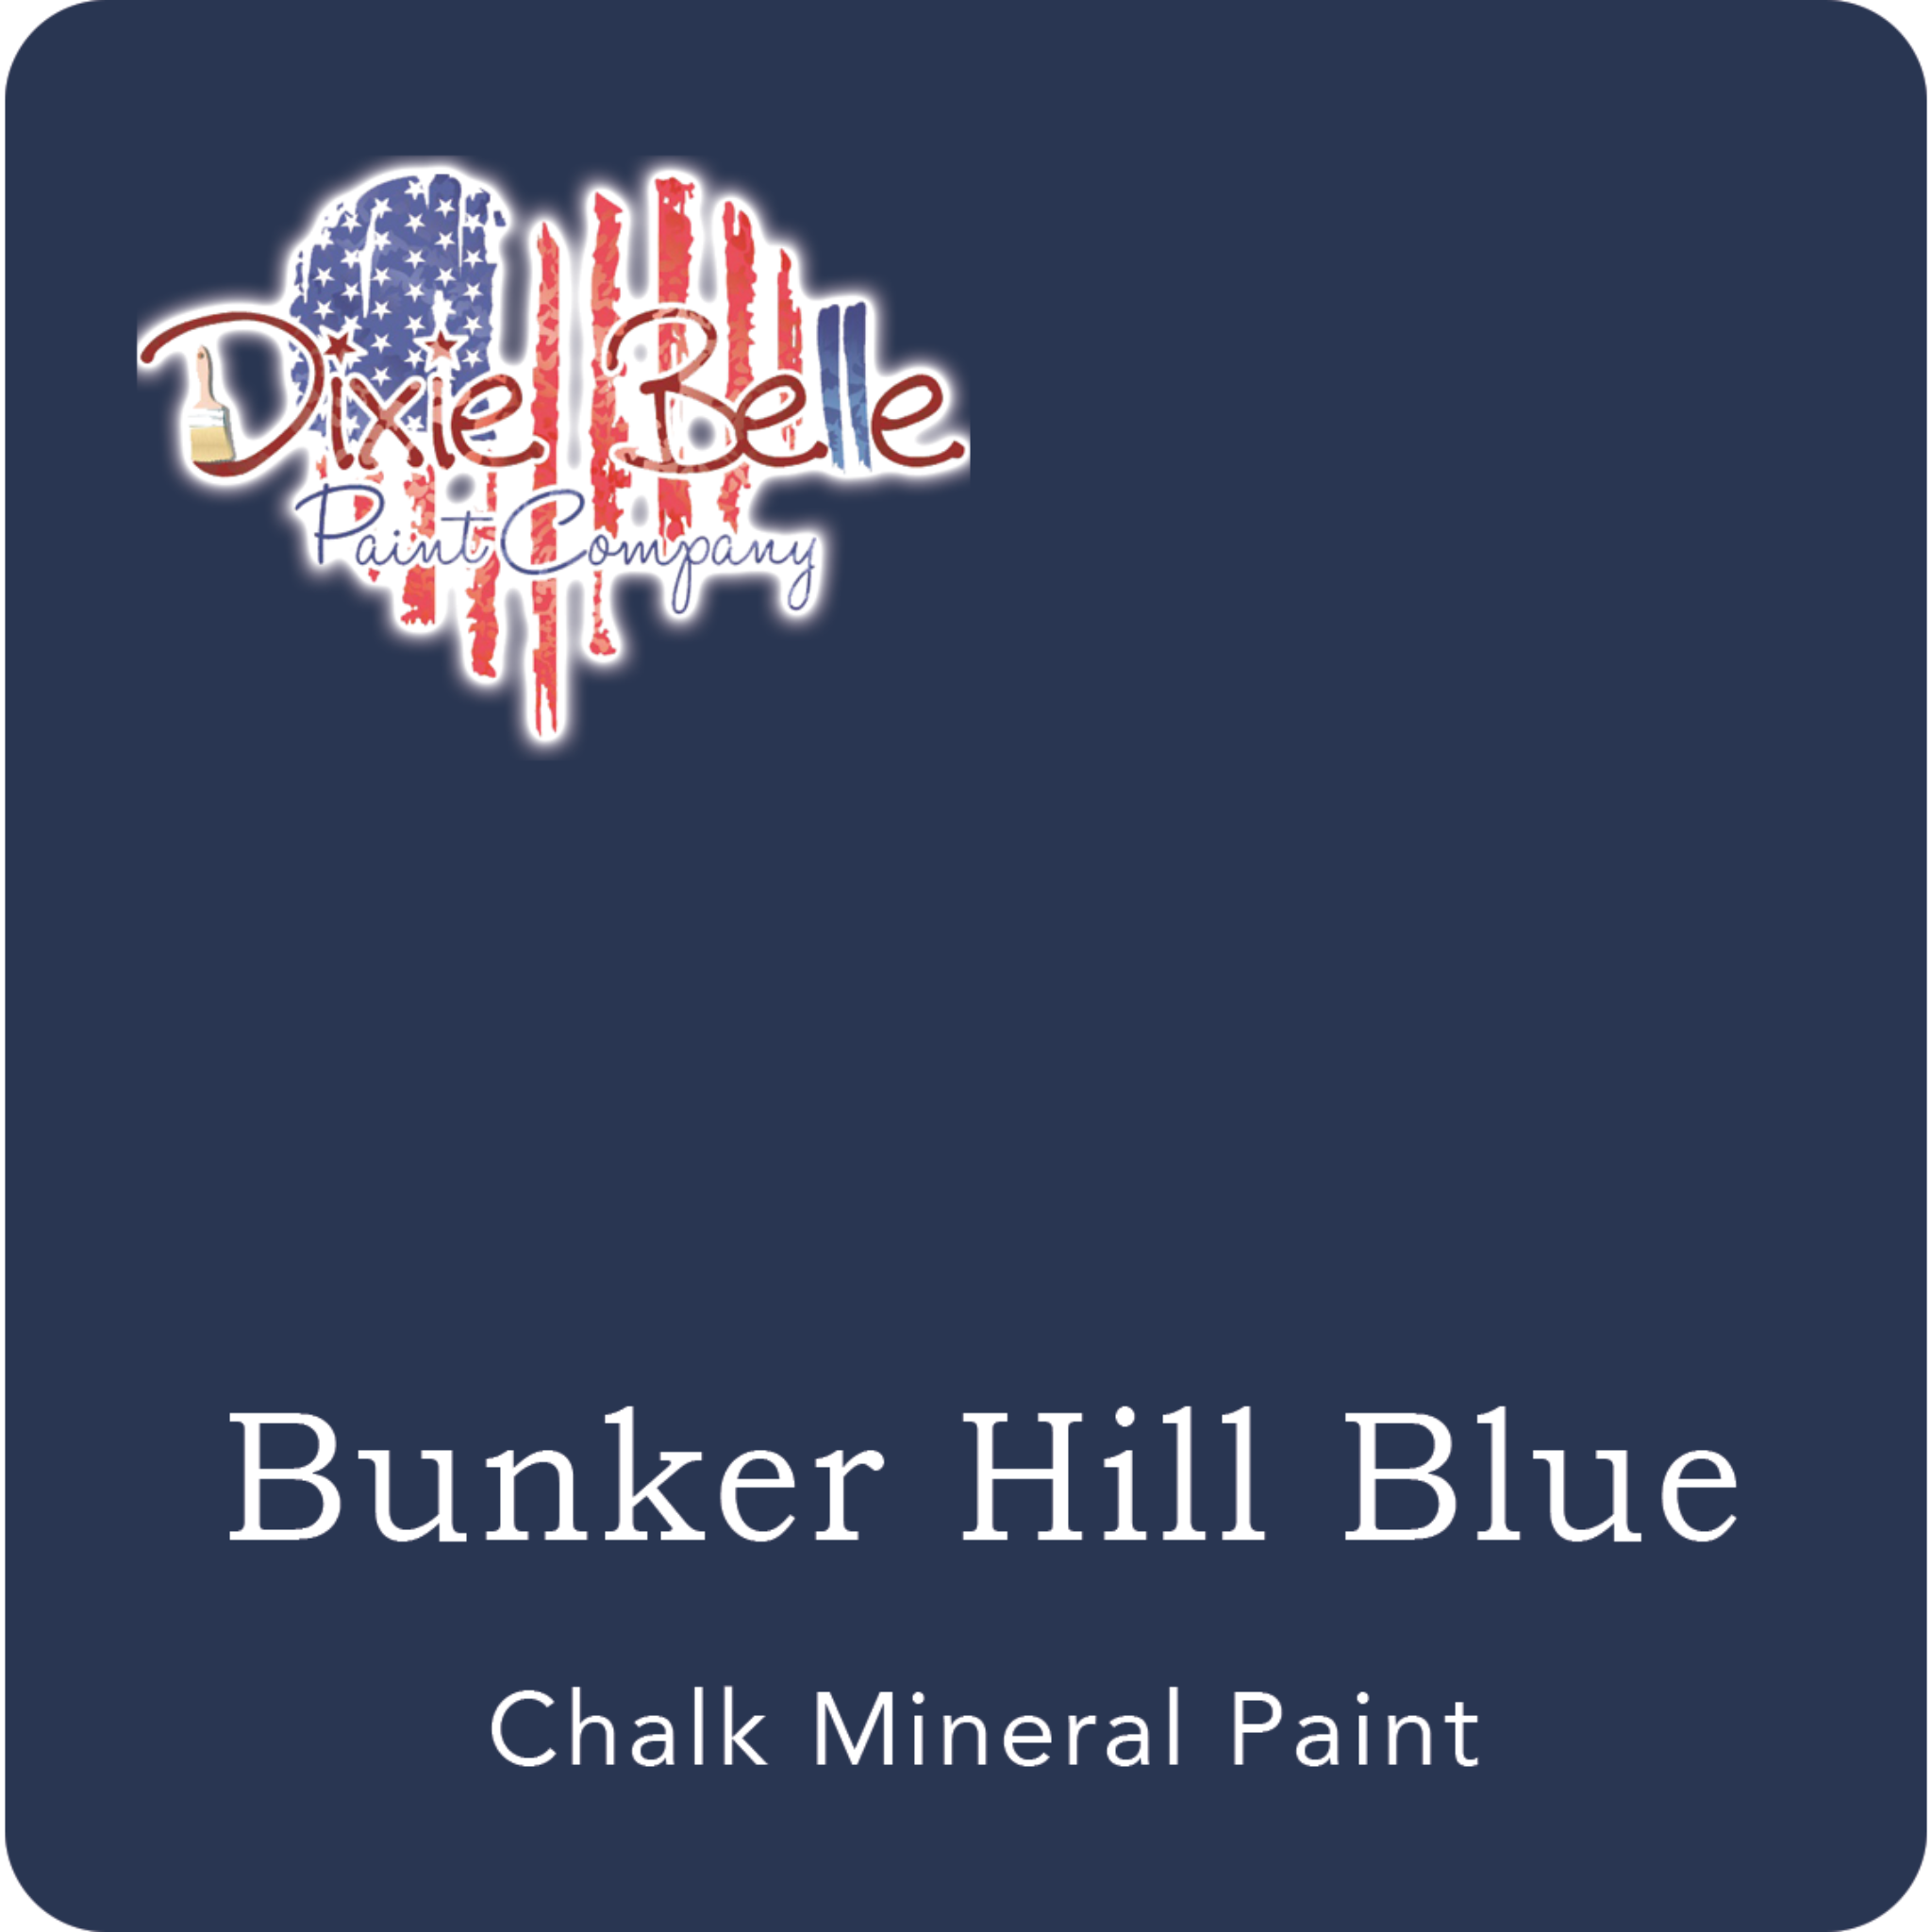 A square swatch card of Dixie Belle Paint Company’s Bunker Hill Blue Chalk Mineral Paint. This color is a rich indigo blue.